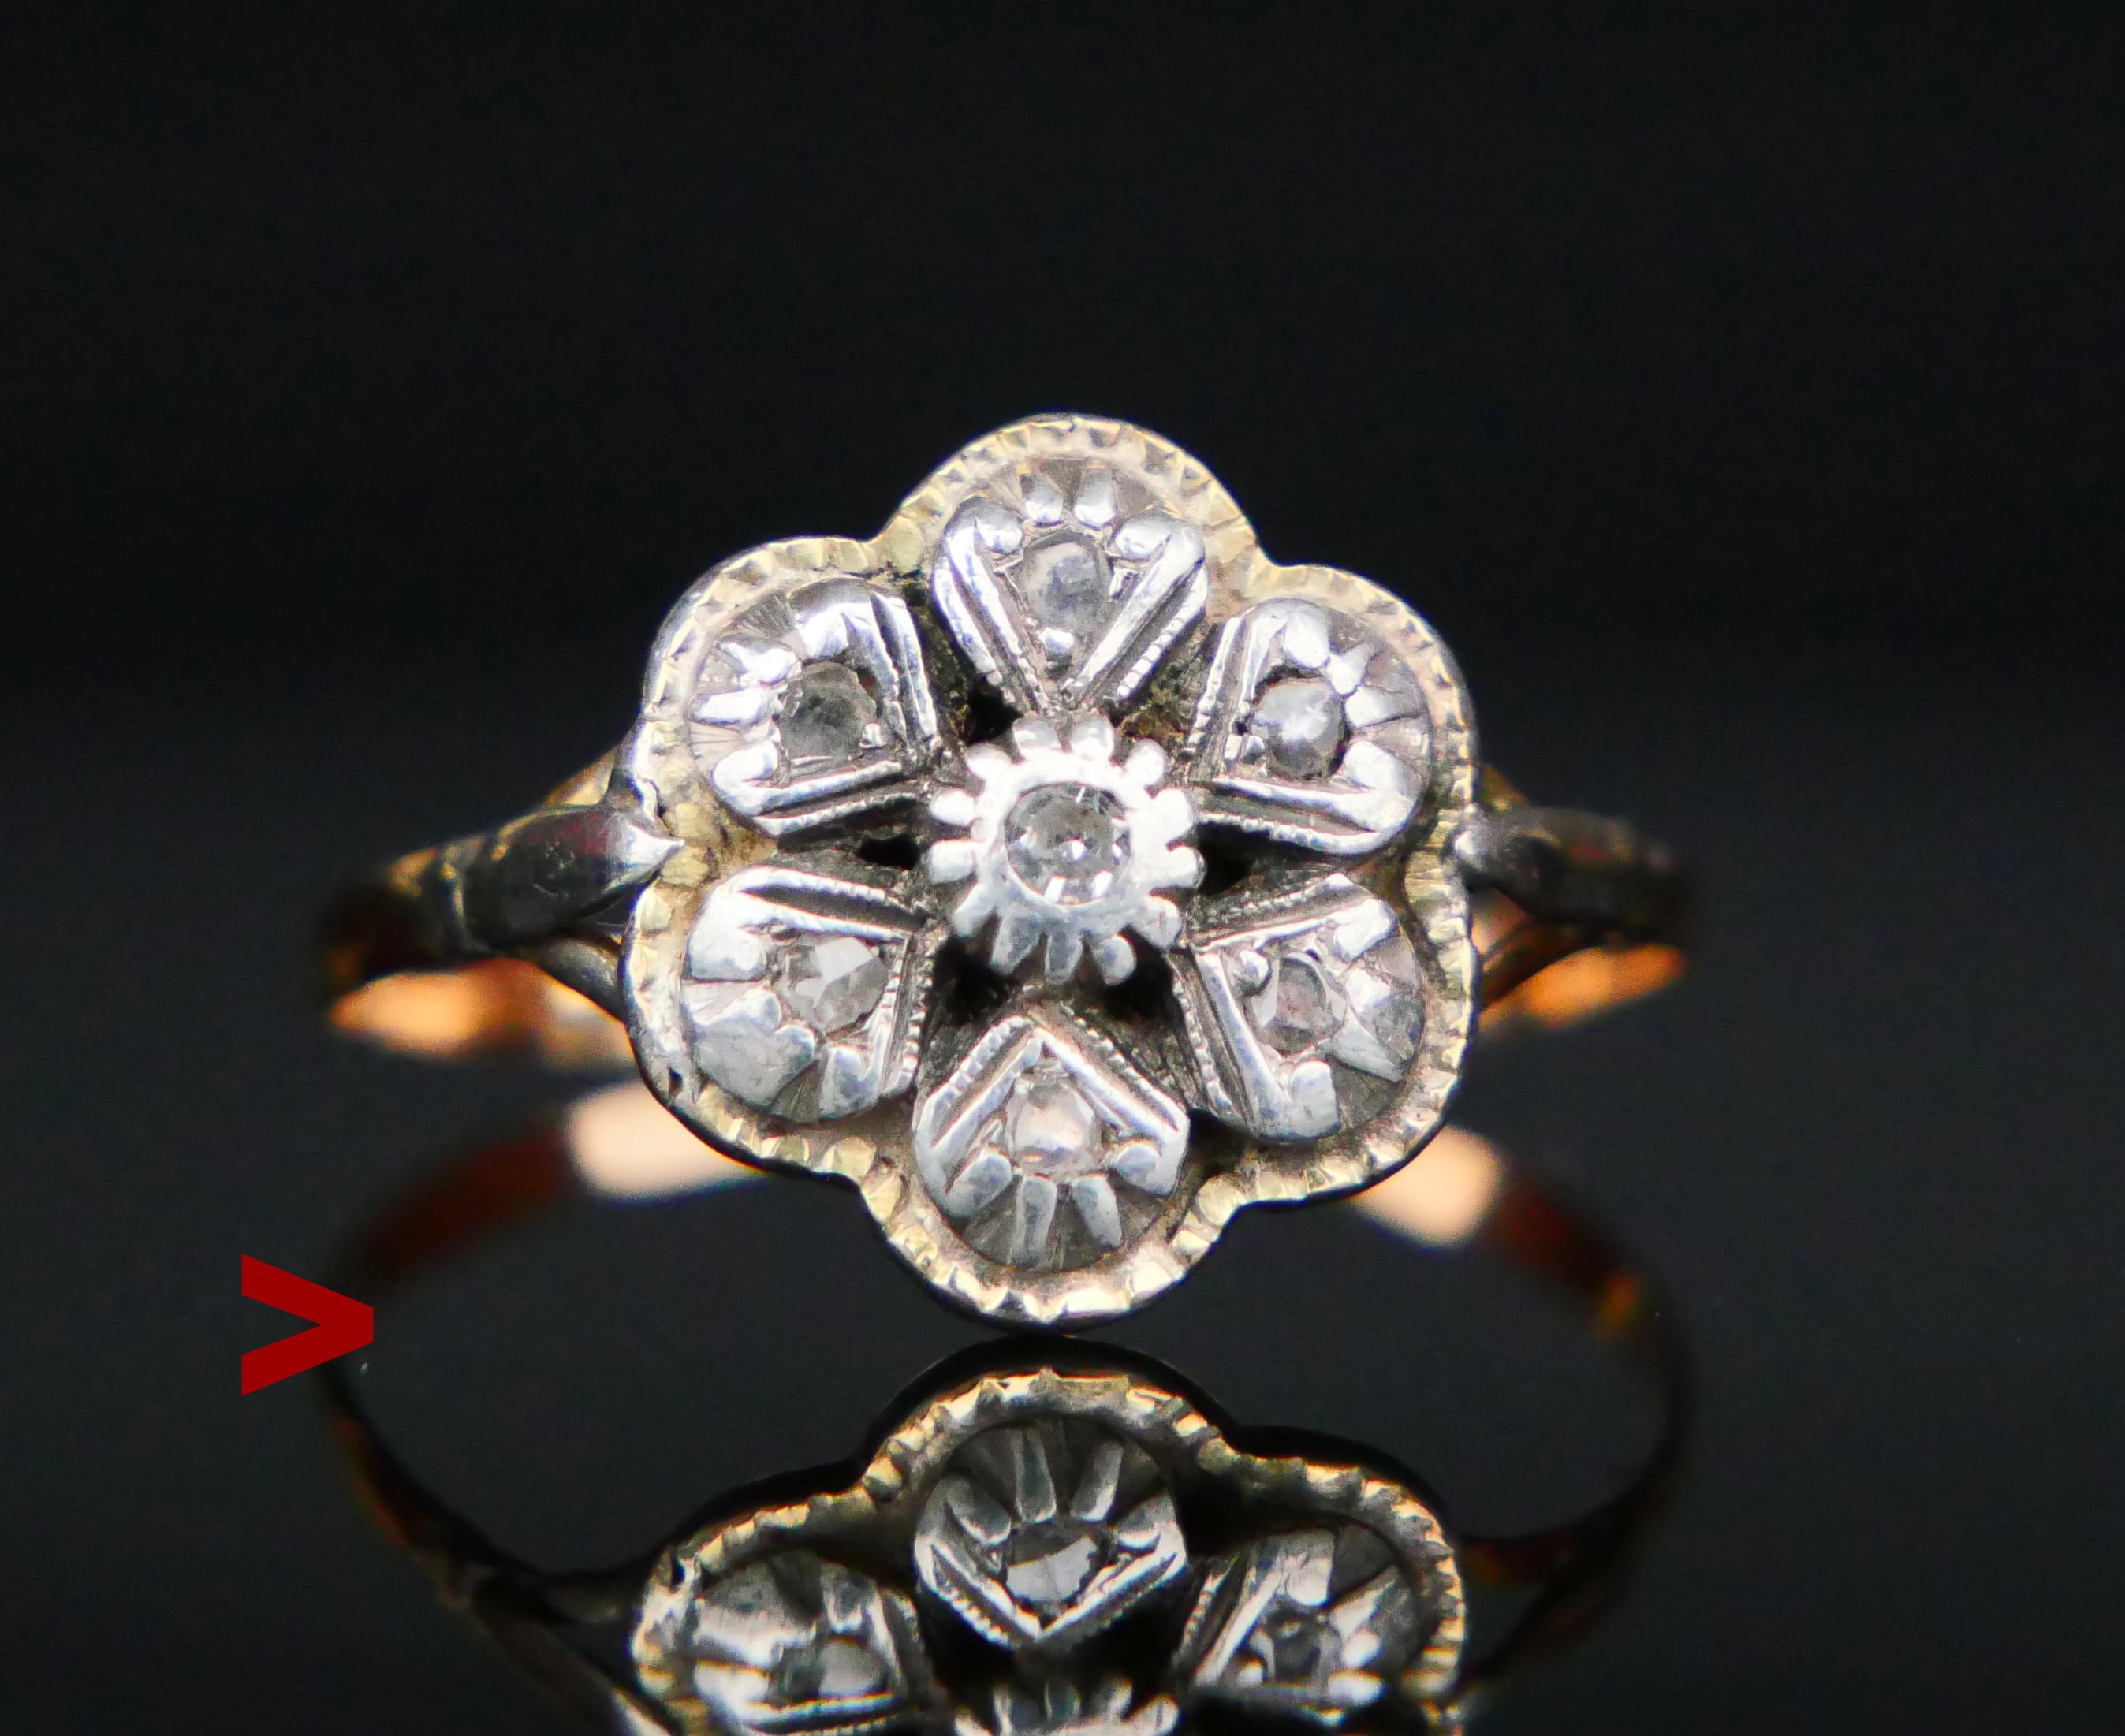 Antique Portuguese Diamond Ring, Renaissance styled.

Band in Rose Gold, base of the crown in Yellow Gold. Band Hallmarked with Portuguese standard 833 Gold hallmarks. Made ca. 1920s -1930s.

One Ø2mm /0.04 ct old diamond cut Diamond in the center